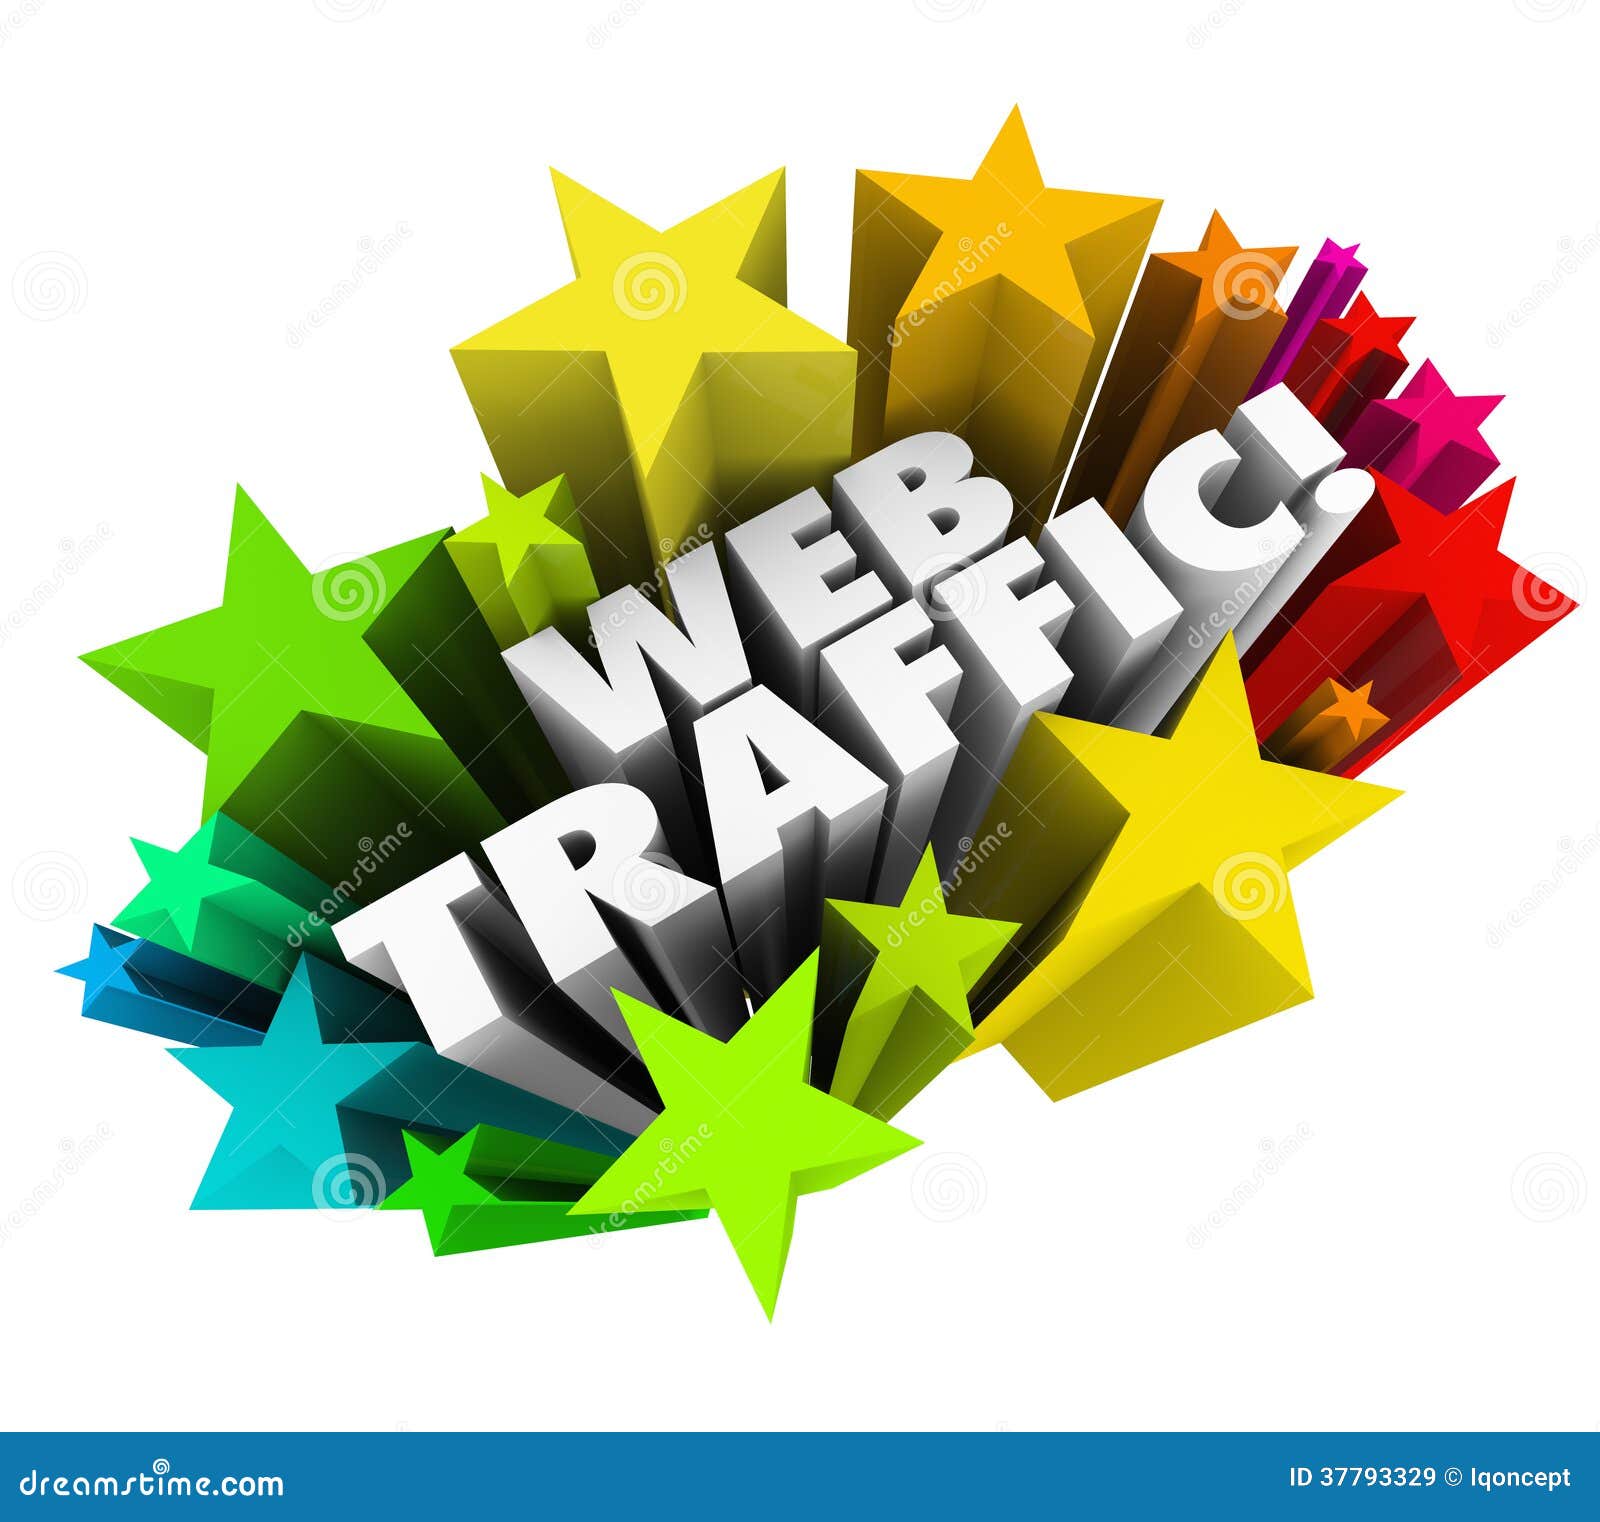 ... to attract new visitors, readers and customers to your website